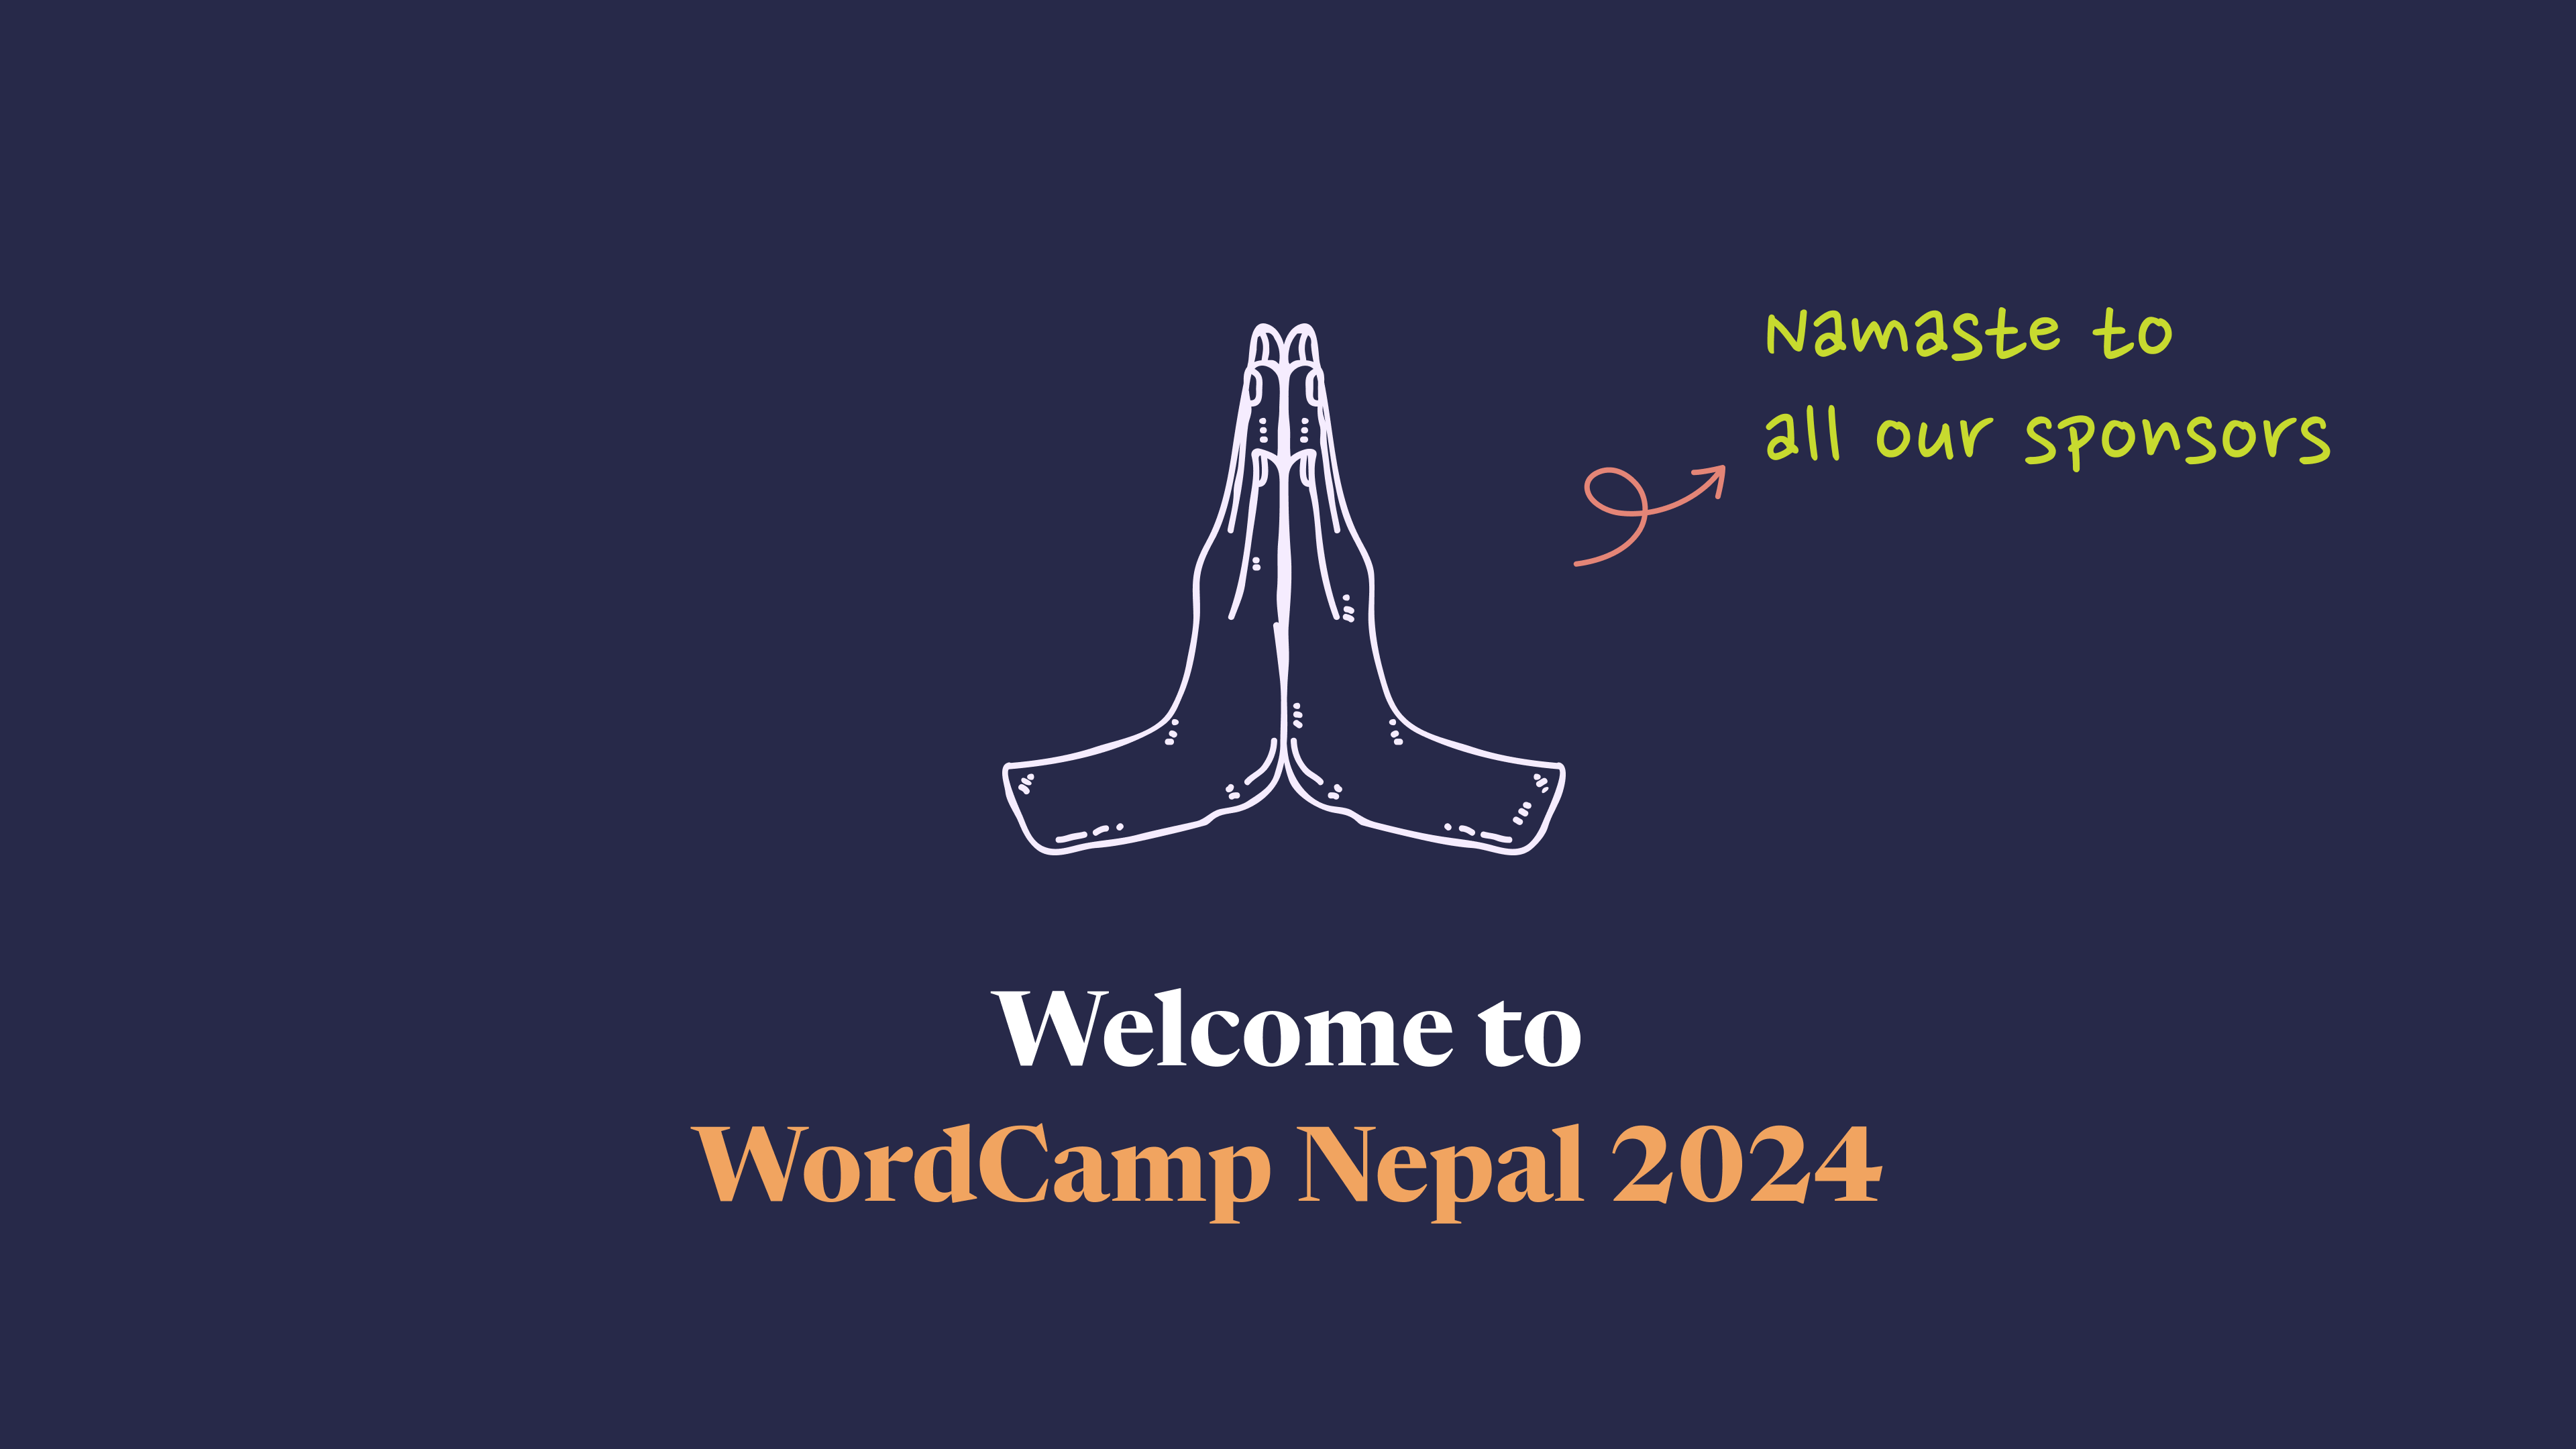 Welcome to WordCamp Nepal 2024